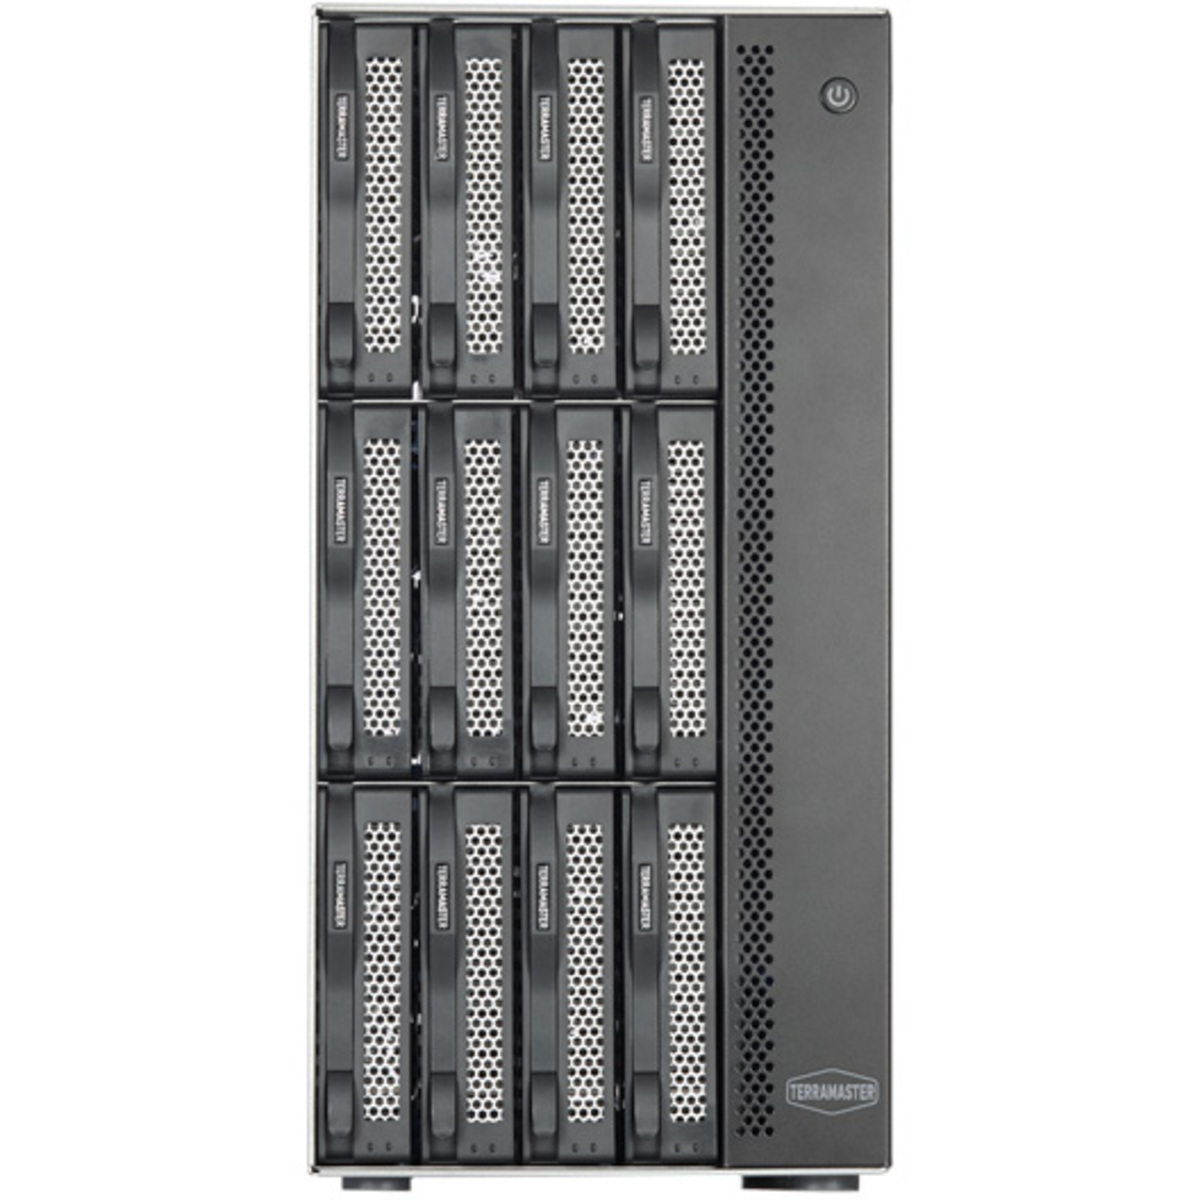 TerraMaster T12-423 220tb 12-Bay Desktop Multimedia / Power User / Business NAS - Network Attached Storage Device 11x20tb Western Digital Ultrastar HC560 WUH722020ALE6L4 3.5 7200rpm SATA 6Gb/s HDD ENTERPRISE Class Drives Installed - Burn-In Tested T12-423